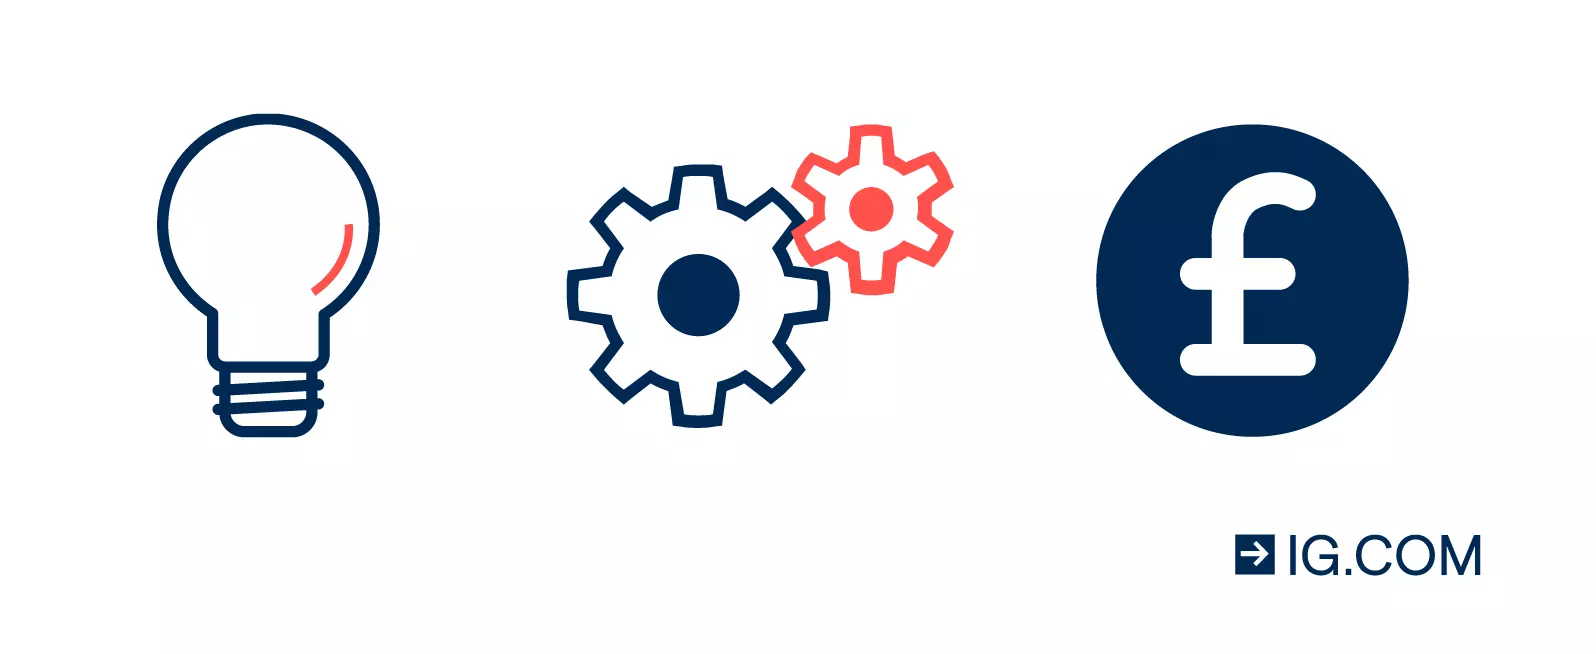 Image of three icons next to each other. The first is a lightbulb, the second, two interlocking cogs and the third is the pound currency symbol.